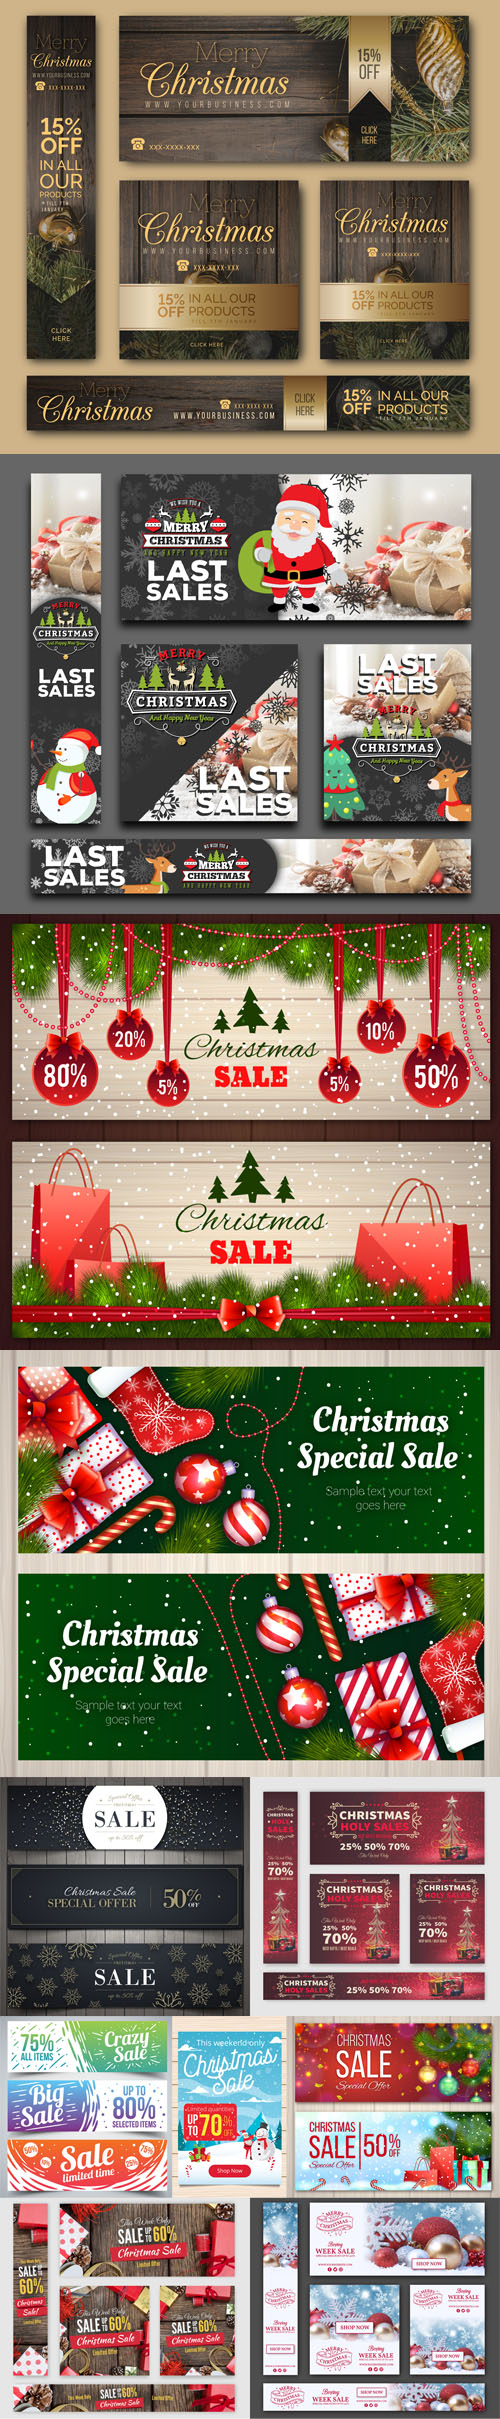 Cute Christmas Sales Banners Collection in Vector